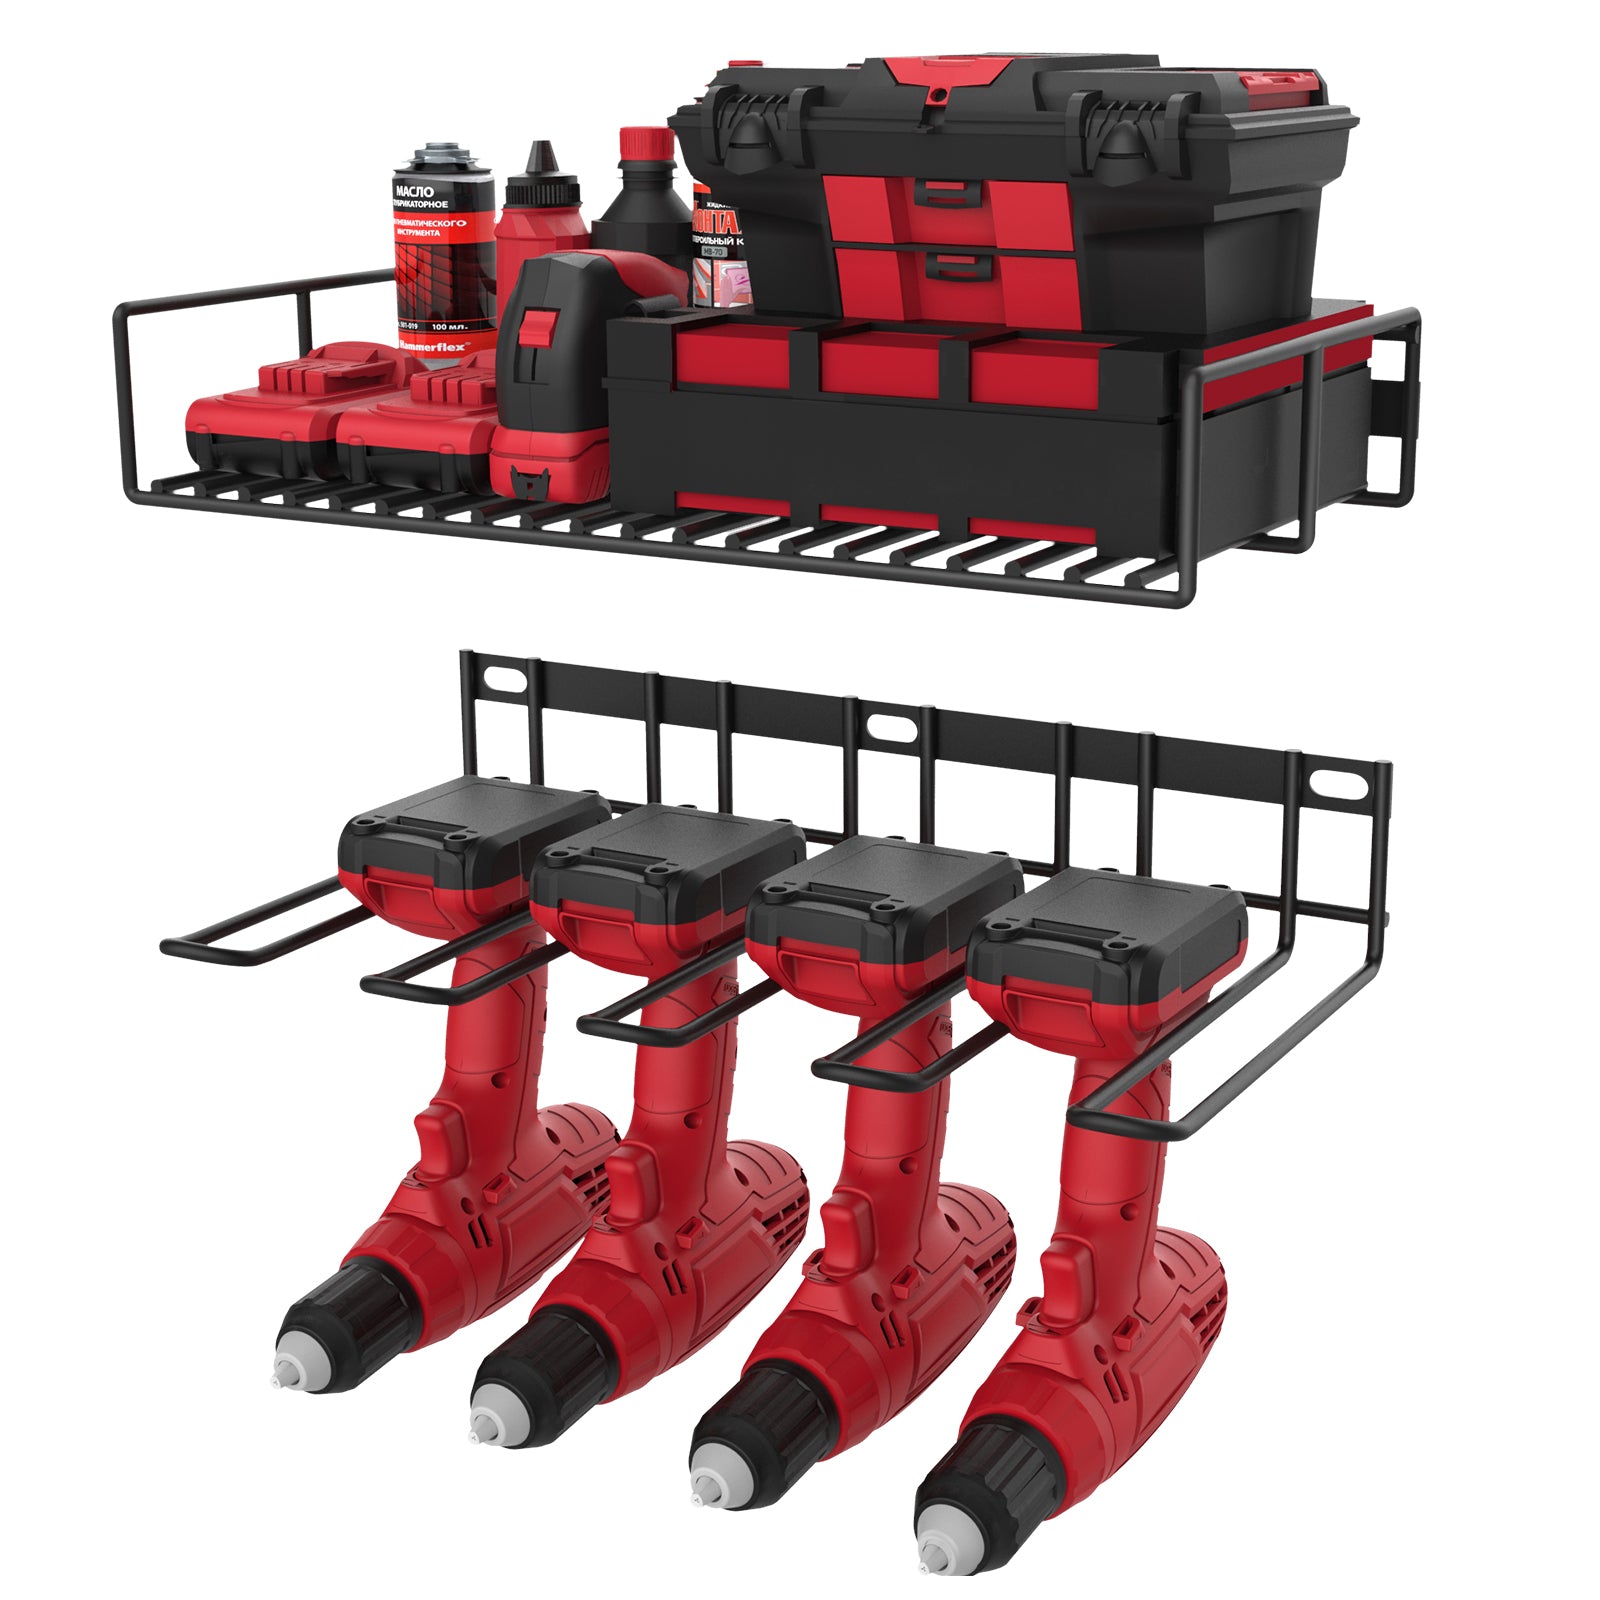 2-Tier Power Tool Organizer, Wall-Mounted Storage for Workshop